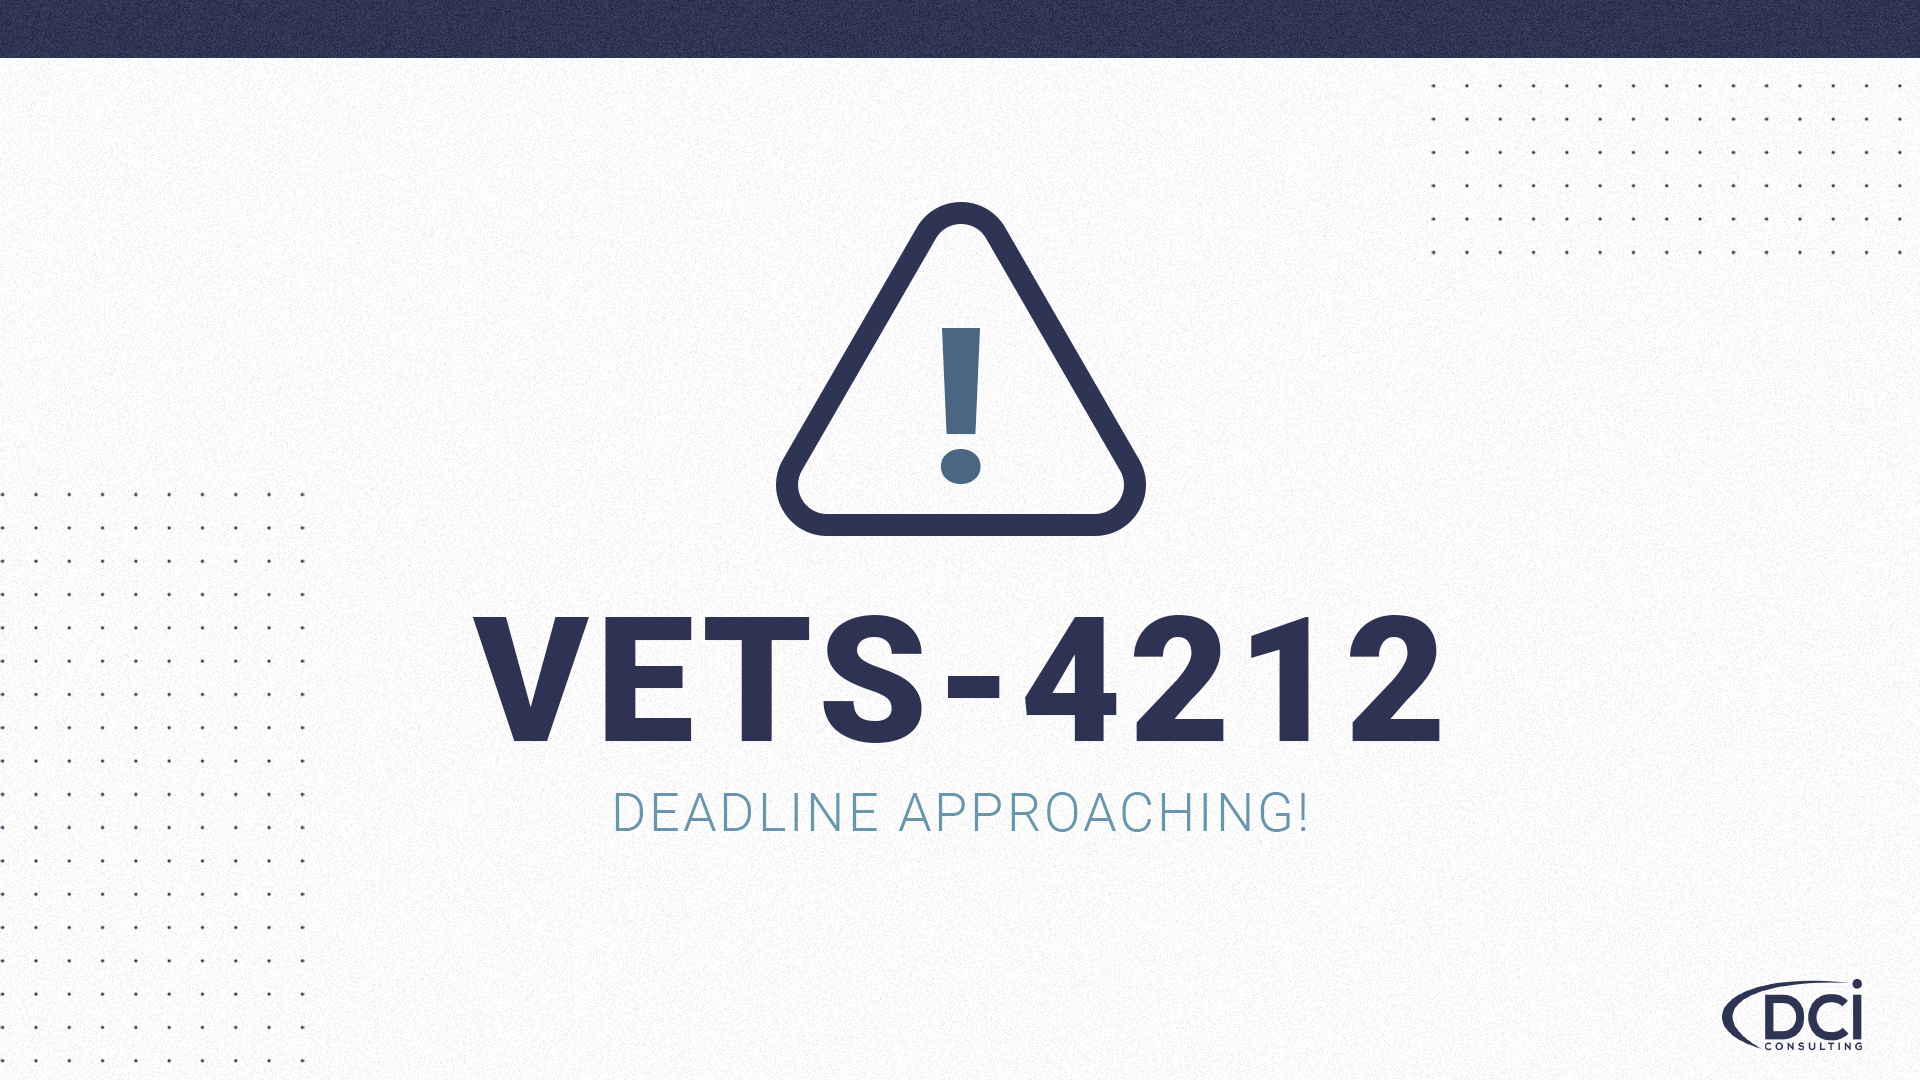 Tips And Reminders For Vets 4212 Reporting 5110